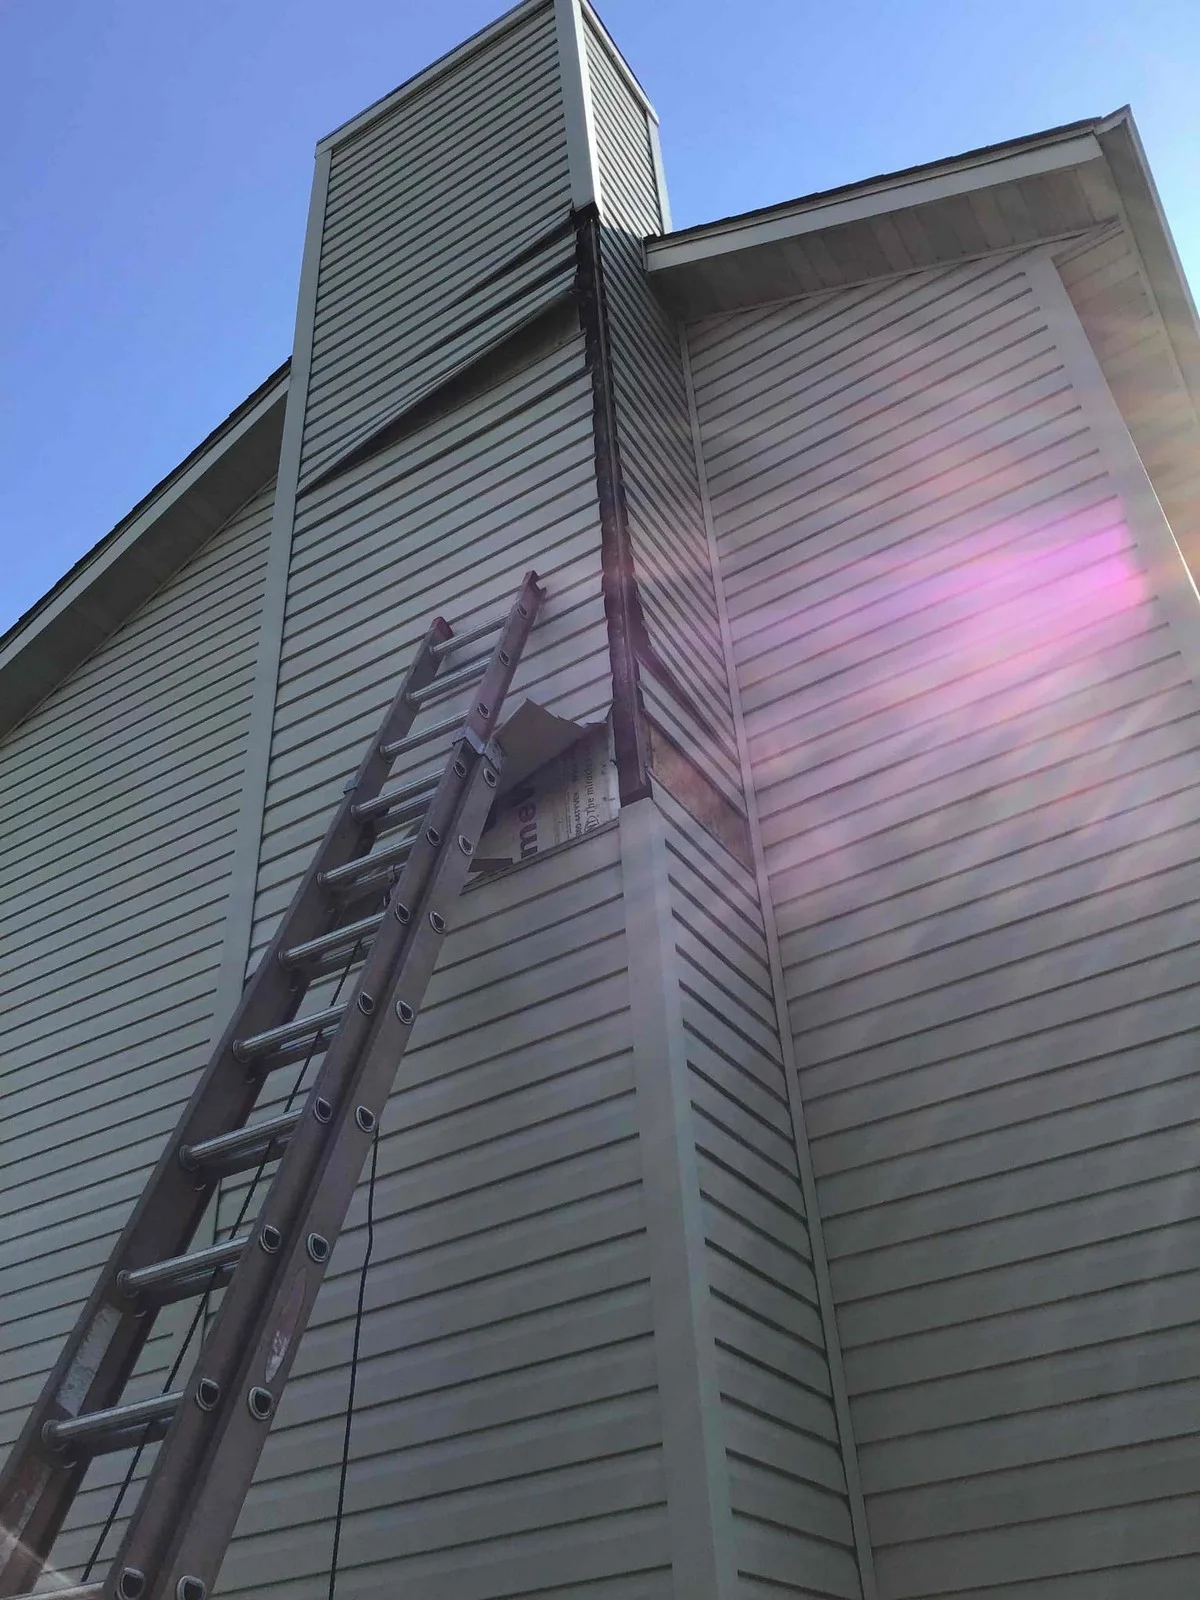 A home in need of siding repair from a handyman in Glen Carbon, IL.